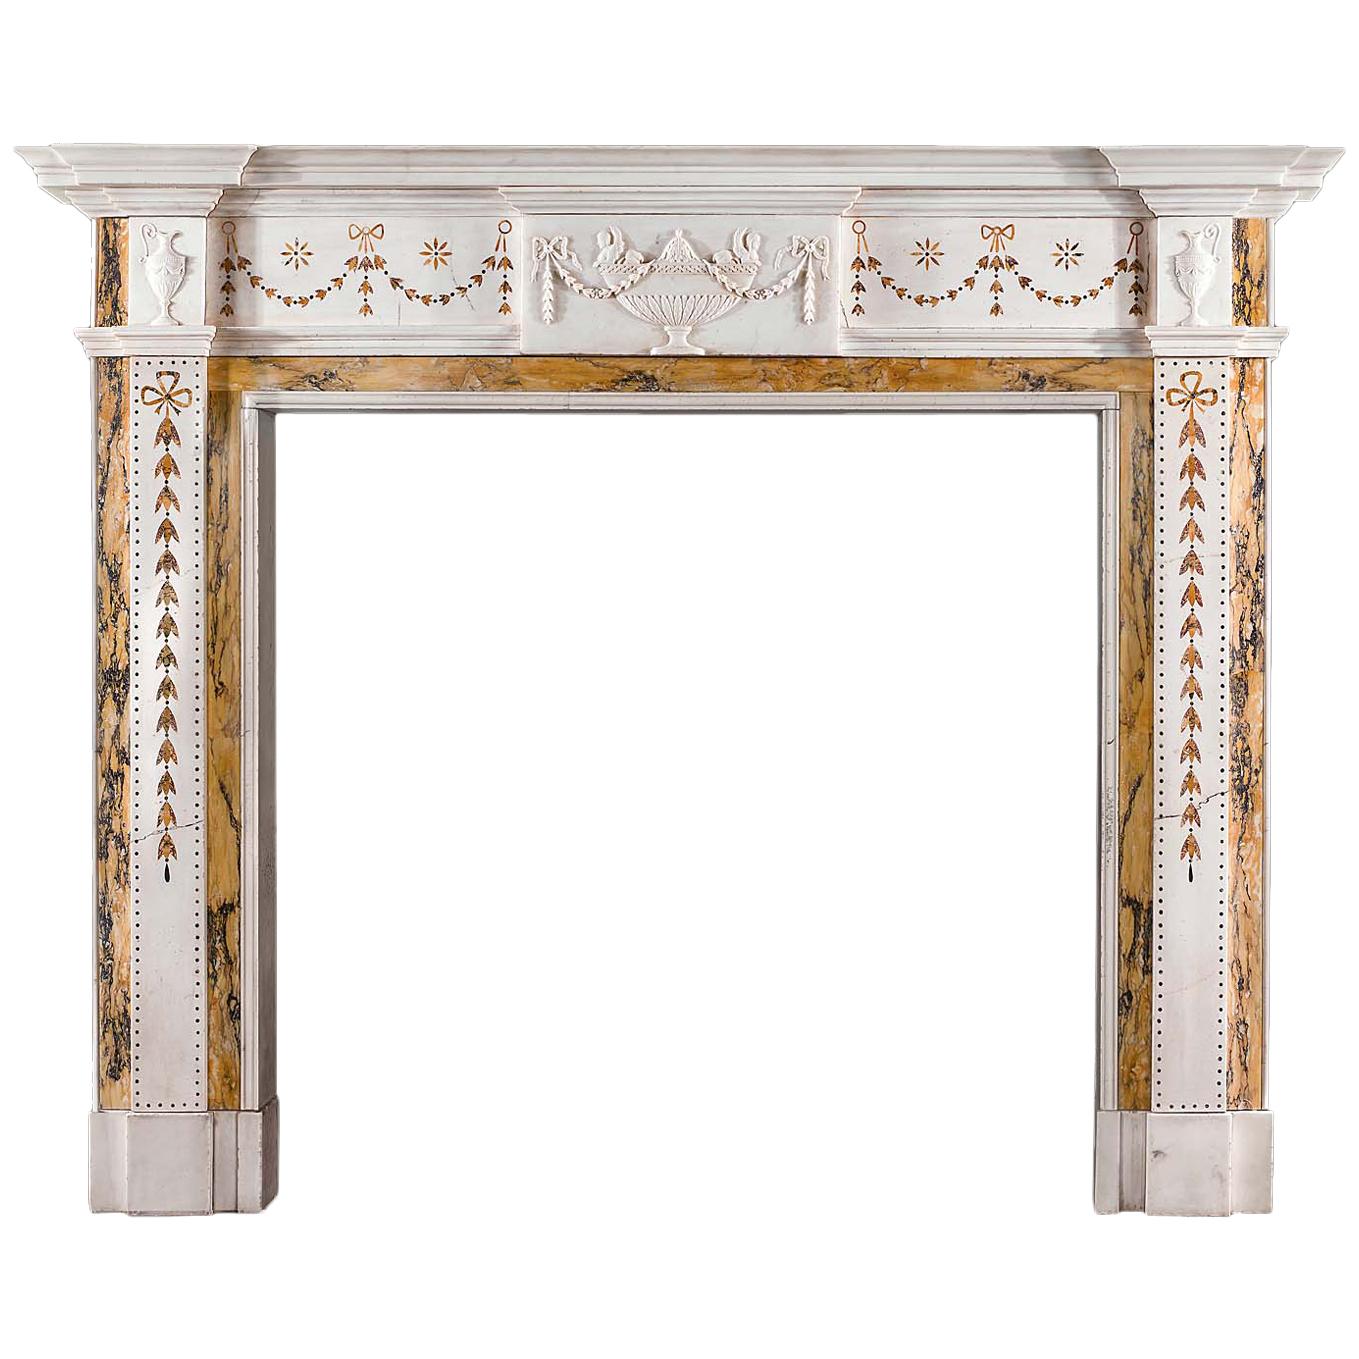 Georgian Style Chimneypiece in Statuary, Sienna and Brocatelle Marble For Sale